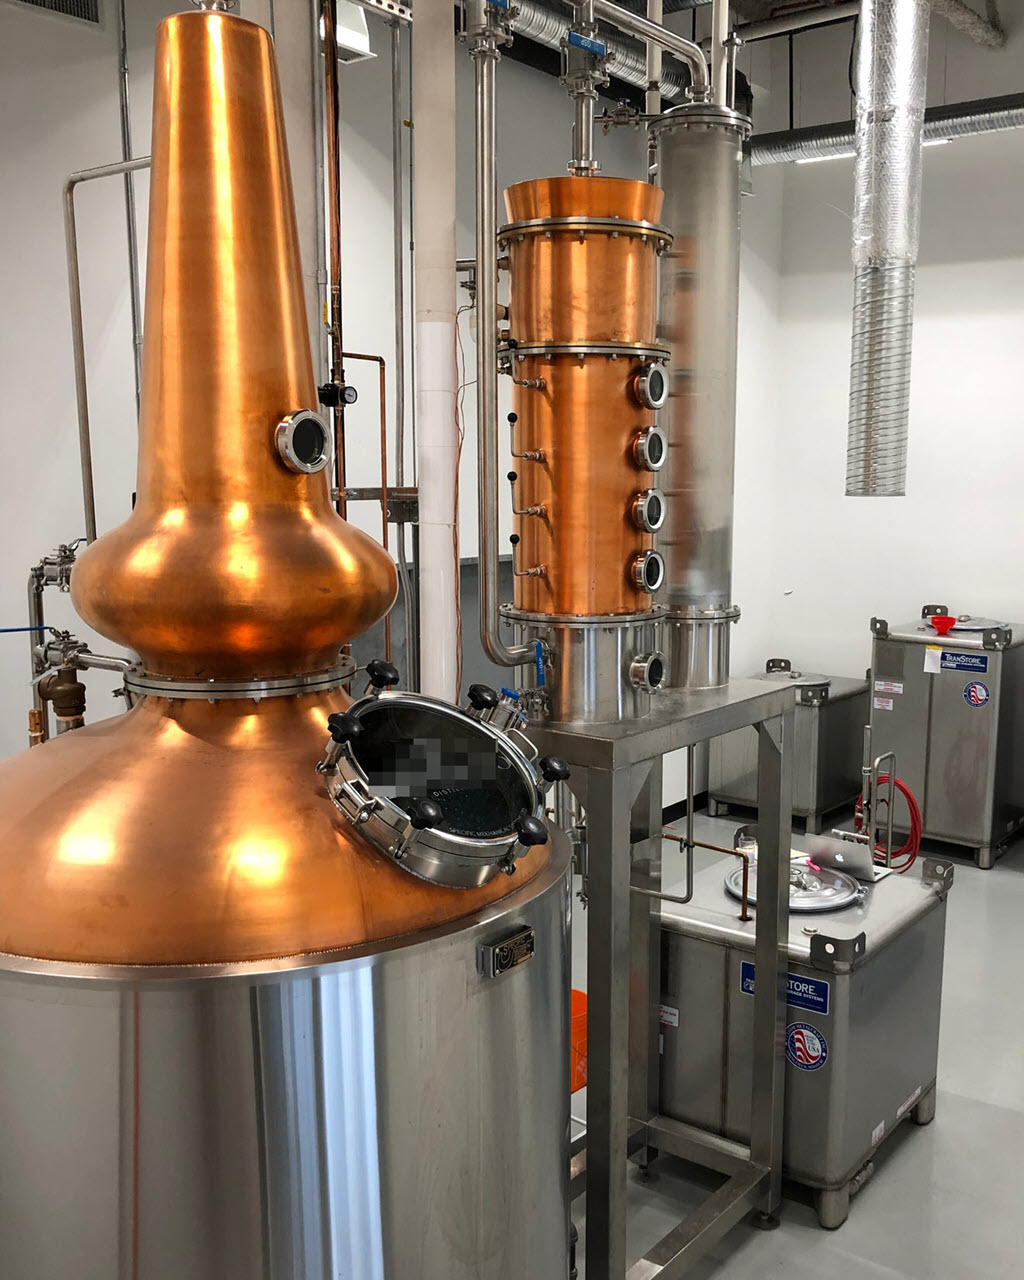 Catoctin Creek Distilling - $1 Million Expansion Plans - Specific Mechanical Systems 2000 Liter Pot Still with column